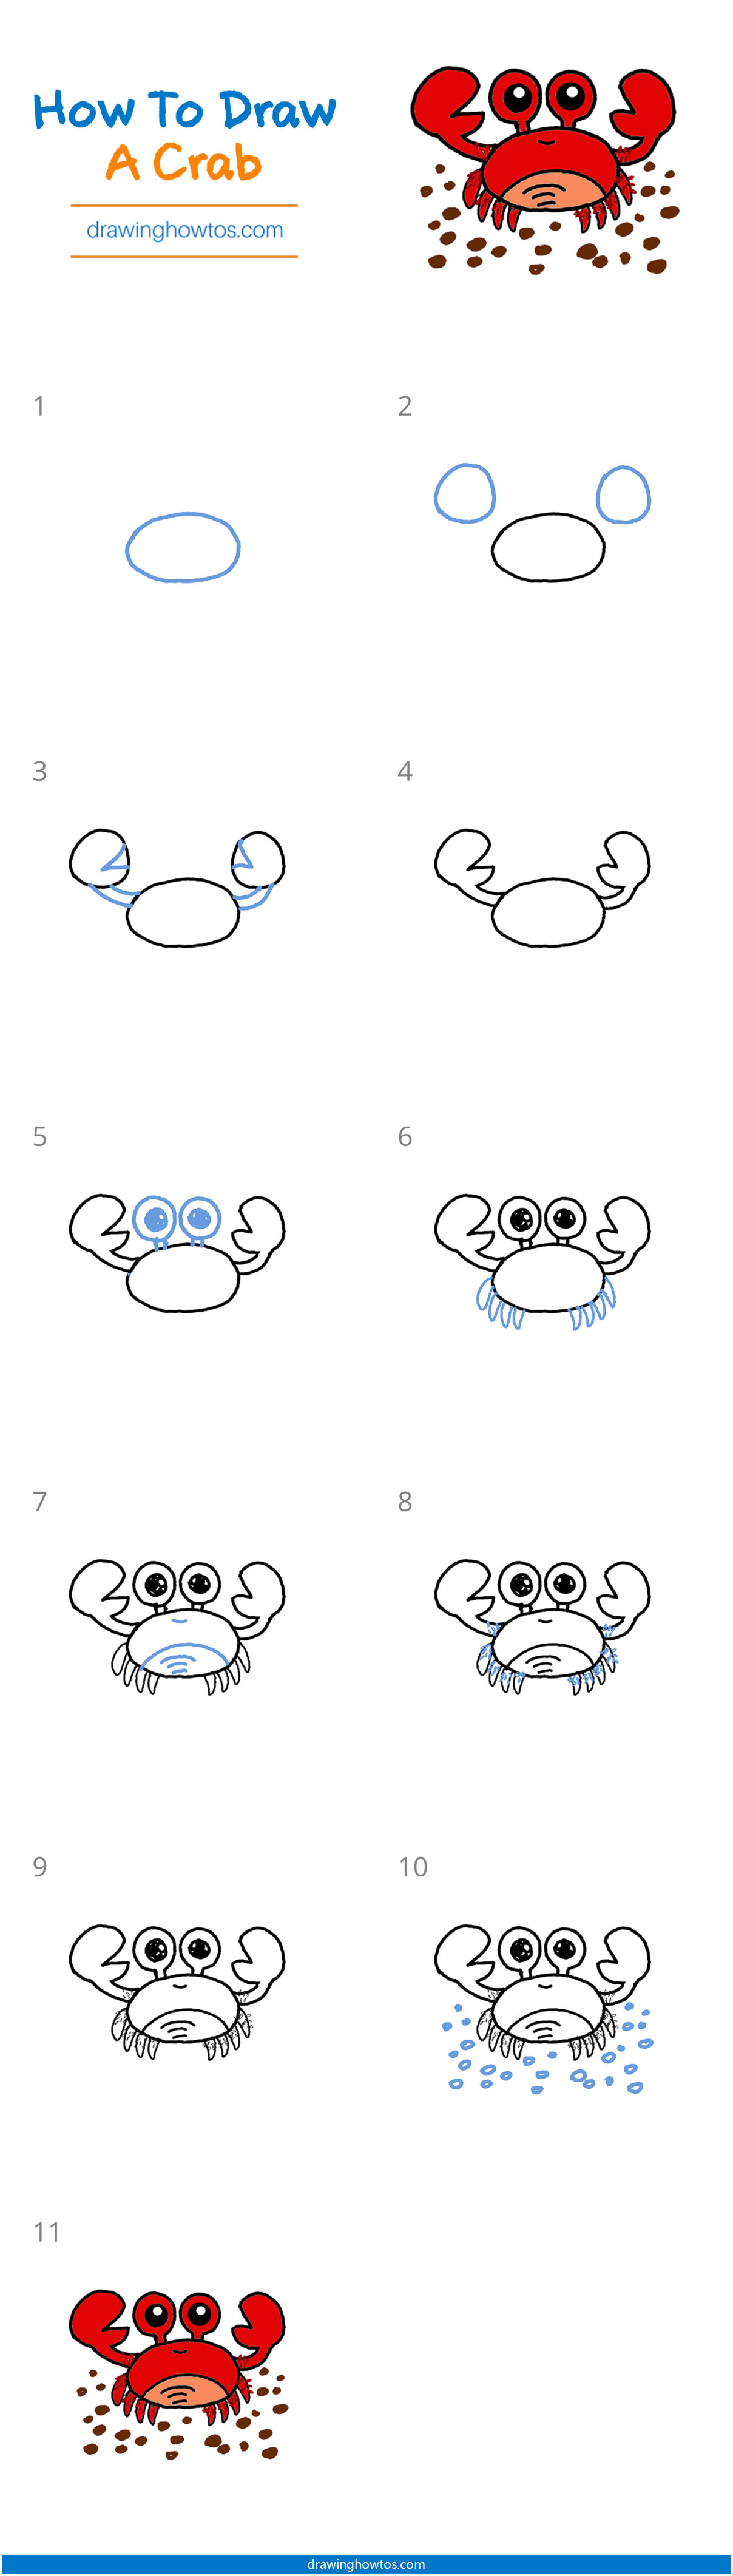 How to Draw a Crab Step by Step